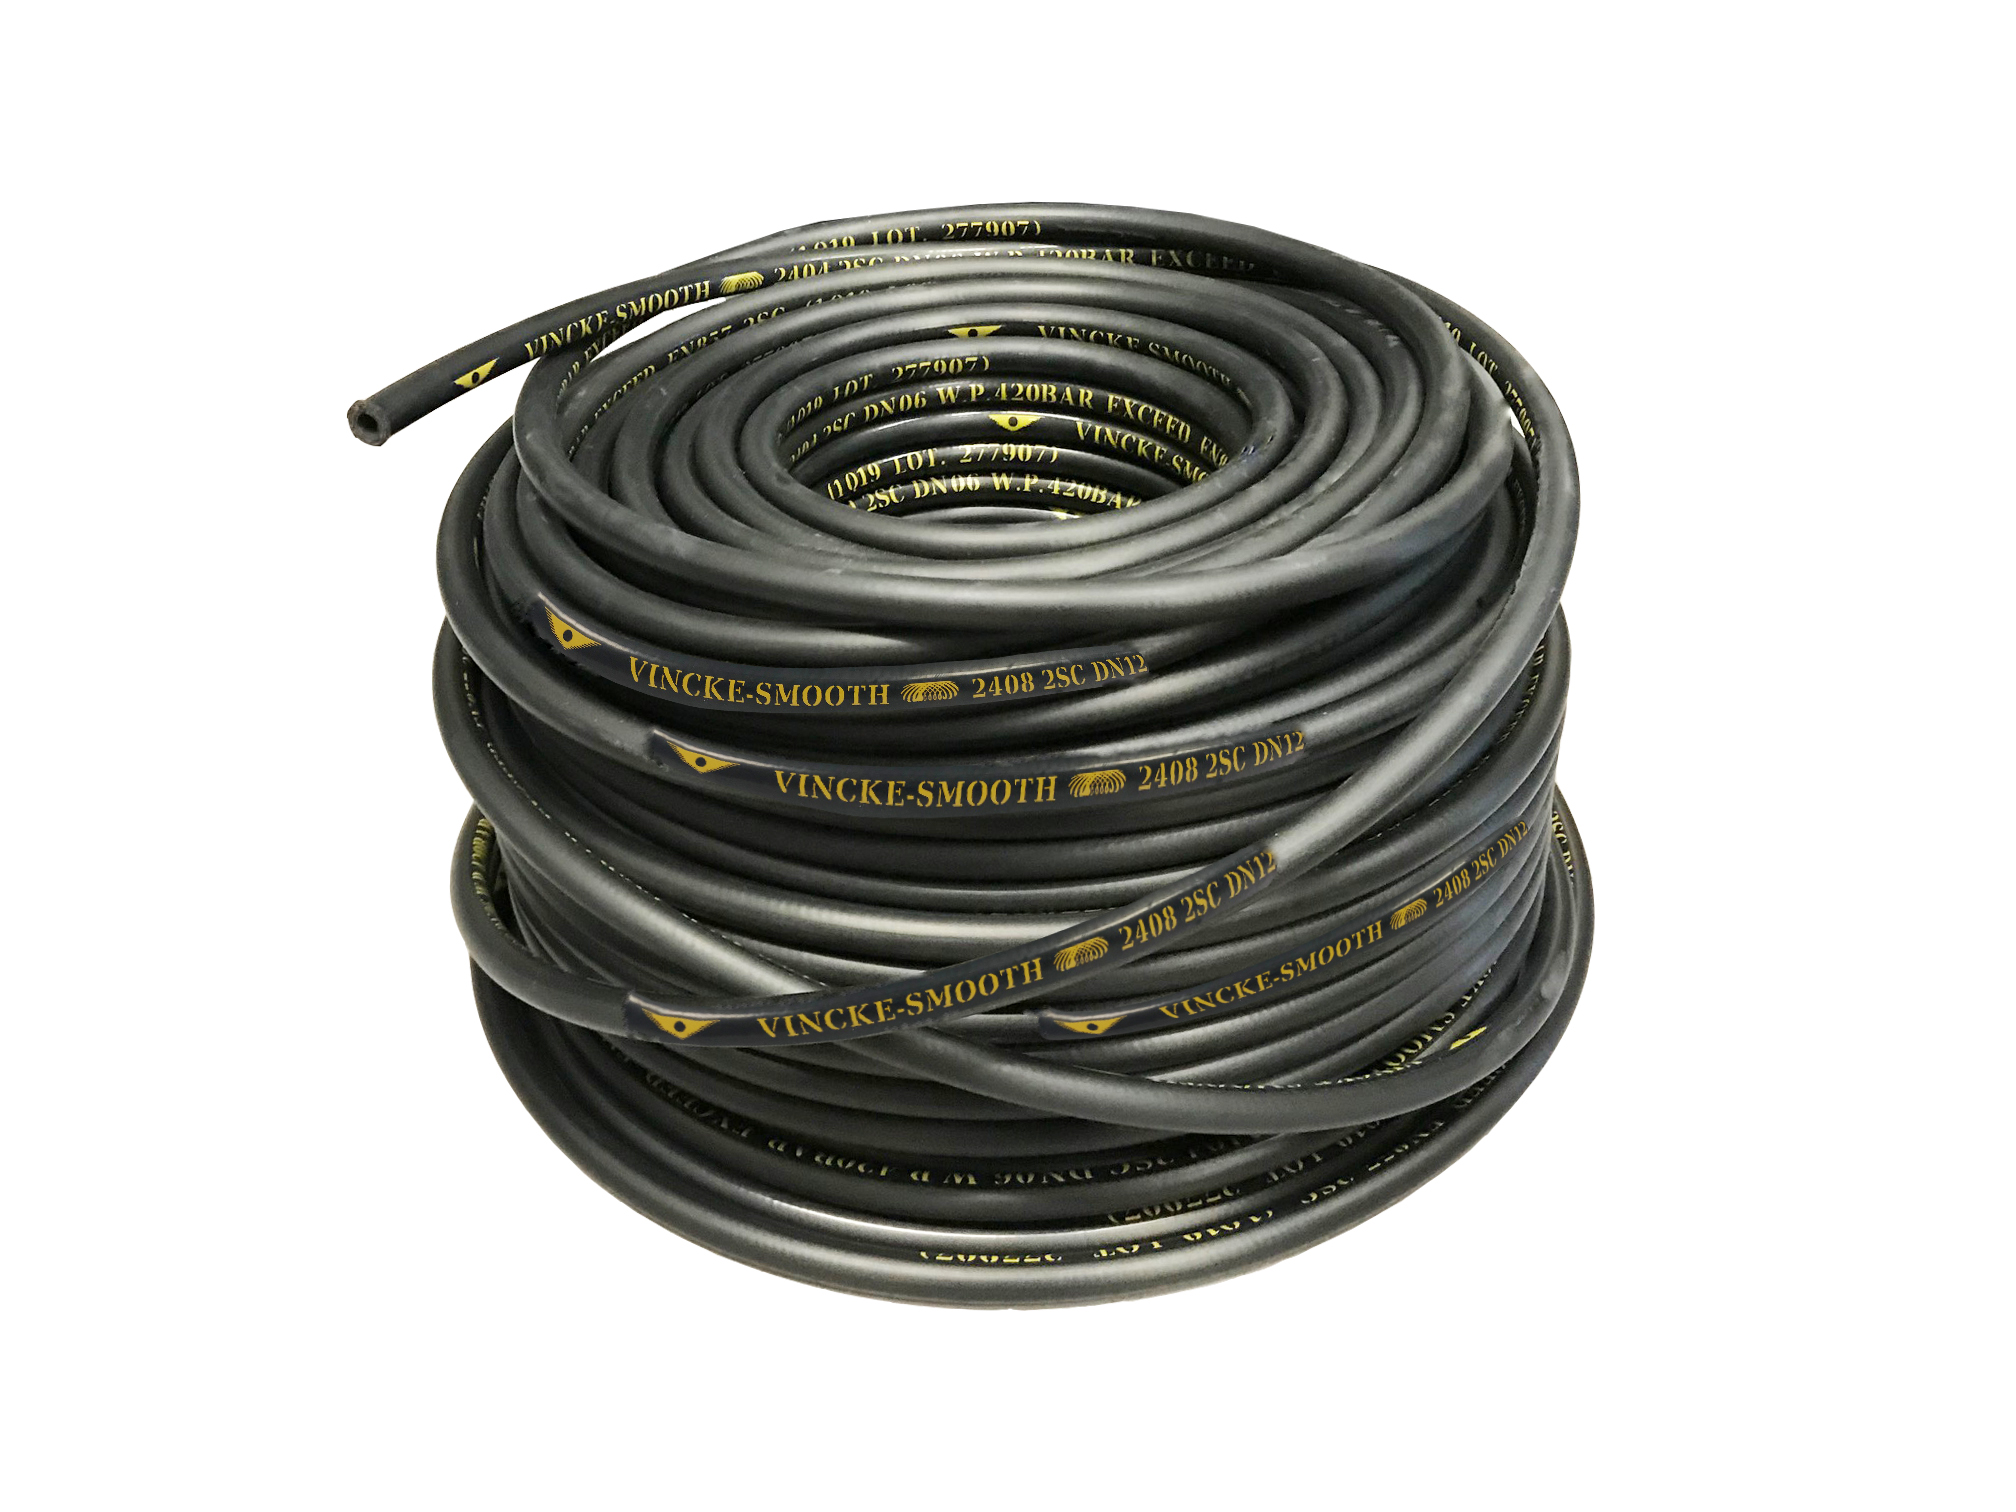 Reel of Vincke 2 Wire 100R2AT SMOOTH Hydraulic Hose, 3/4" Bore, 25 Metre Coil